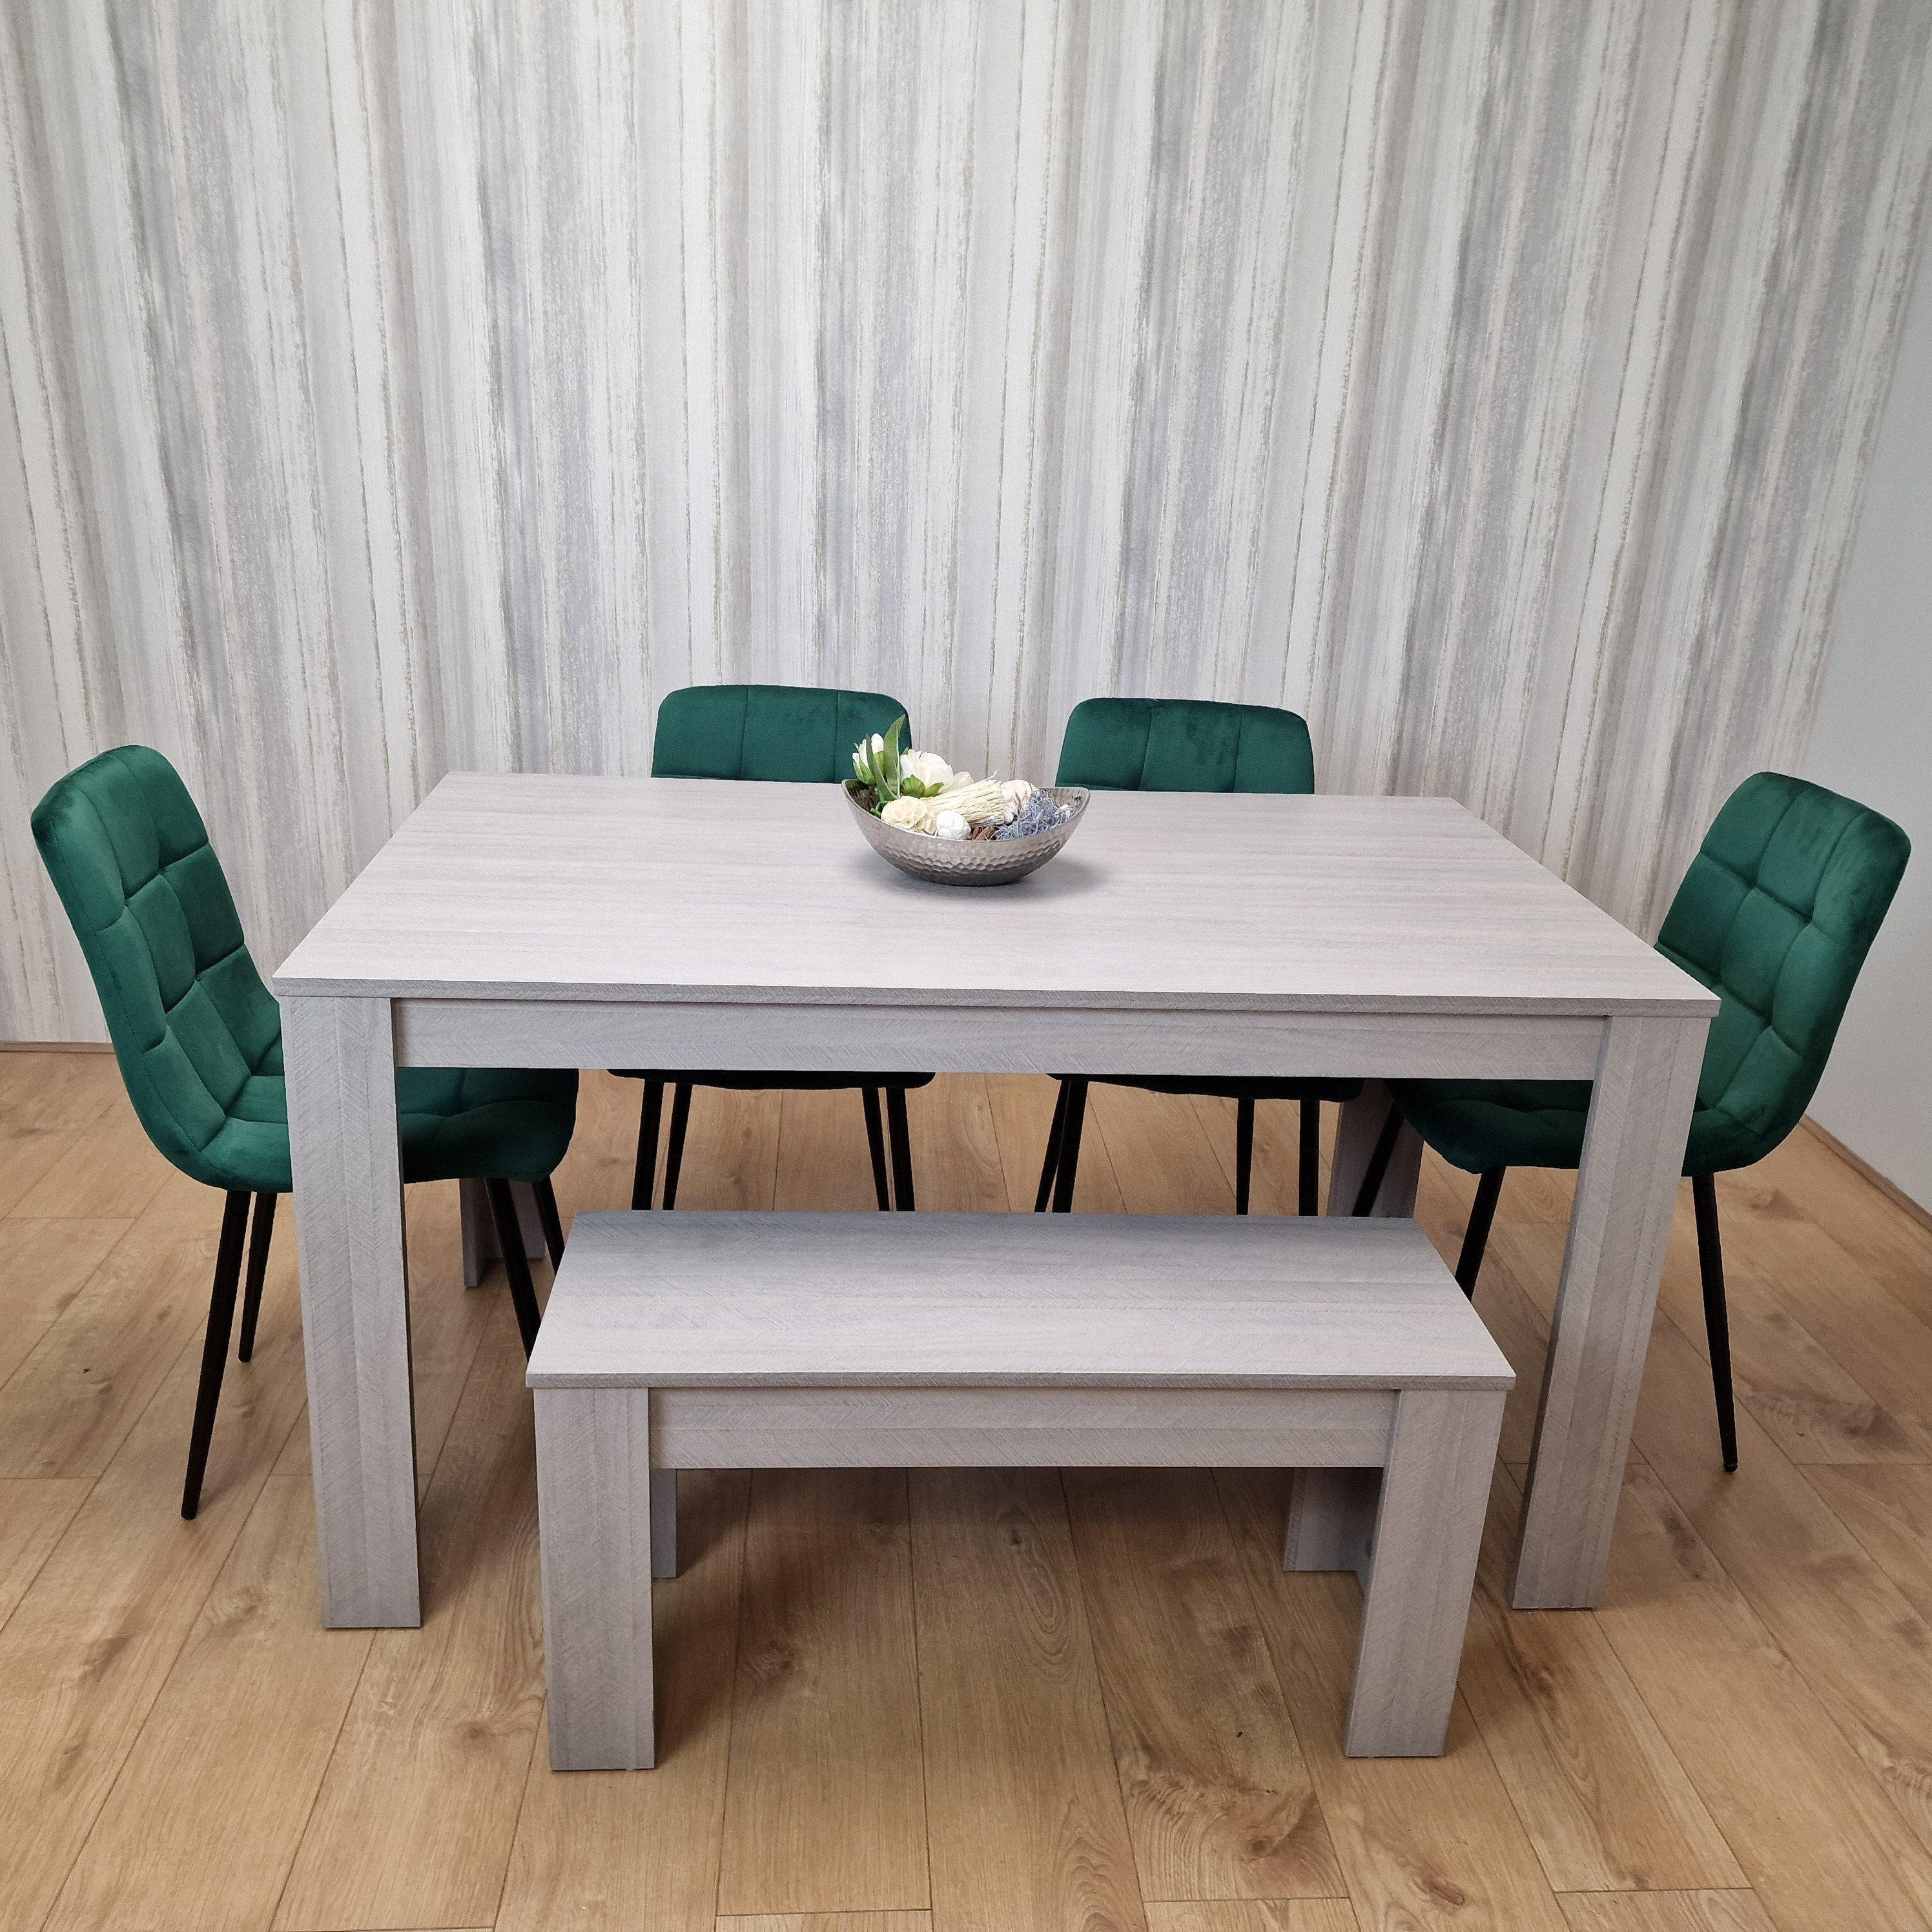 Grey Dining Table and 4 Green Velvet Chairs With 1 Bench Kitchen Dining Table for 4 Dining Room Dining Set - image 1